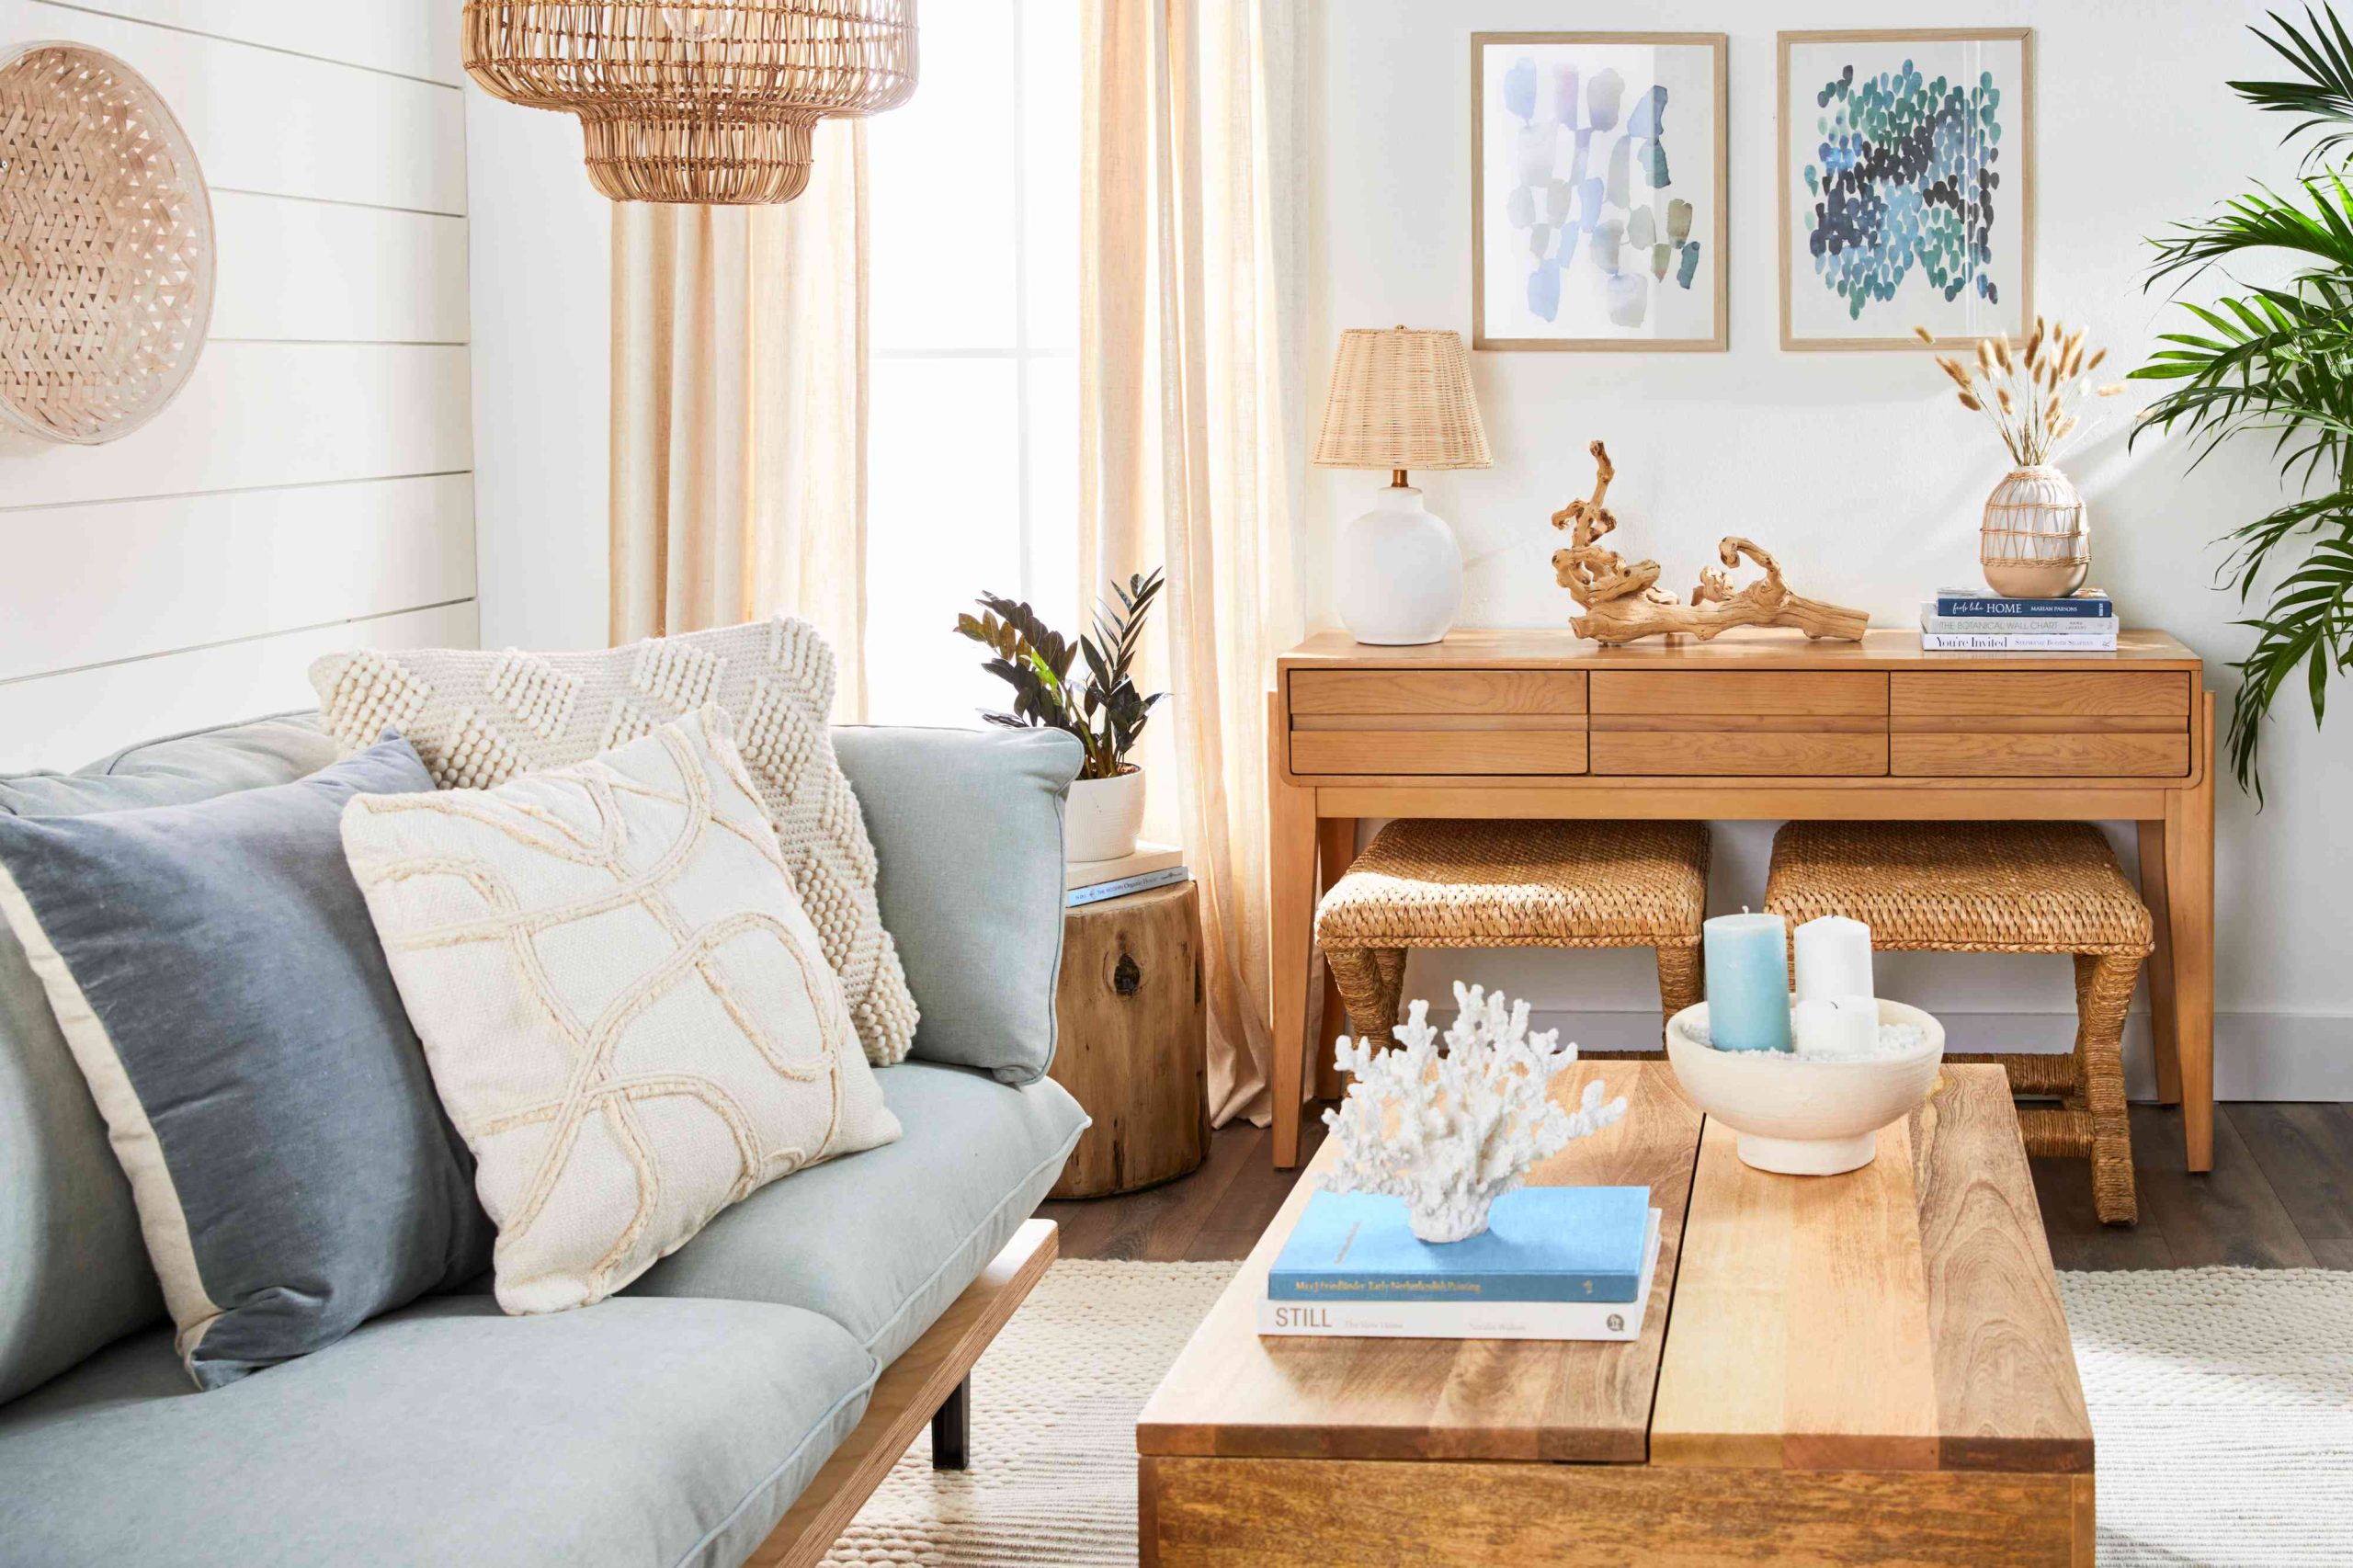 “Sands of Style: Inspiring Seaside Home Interiors”